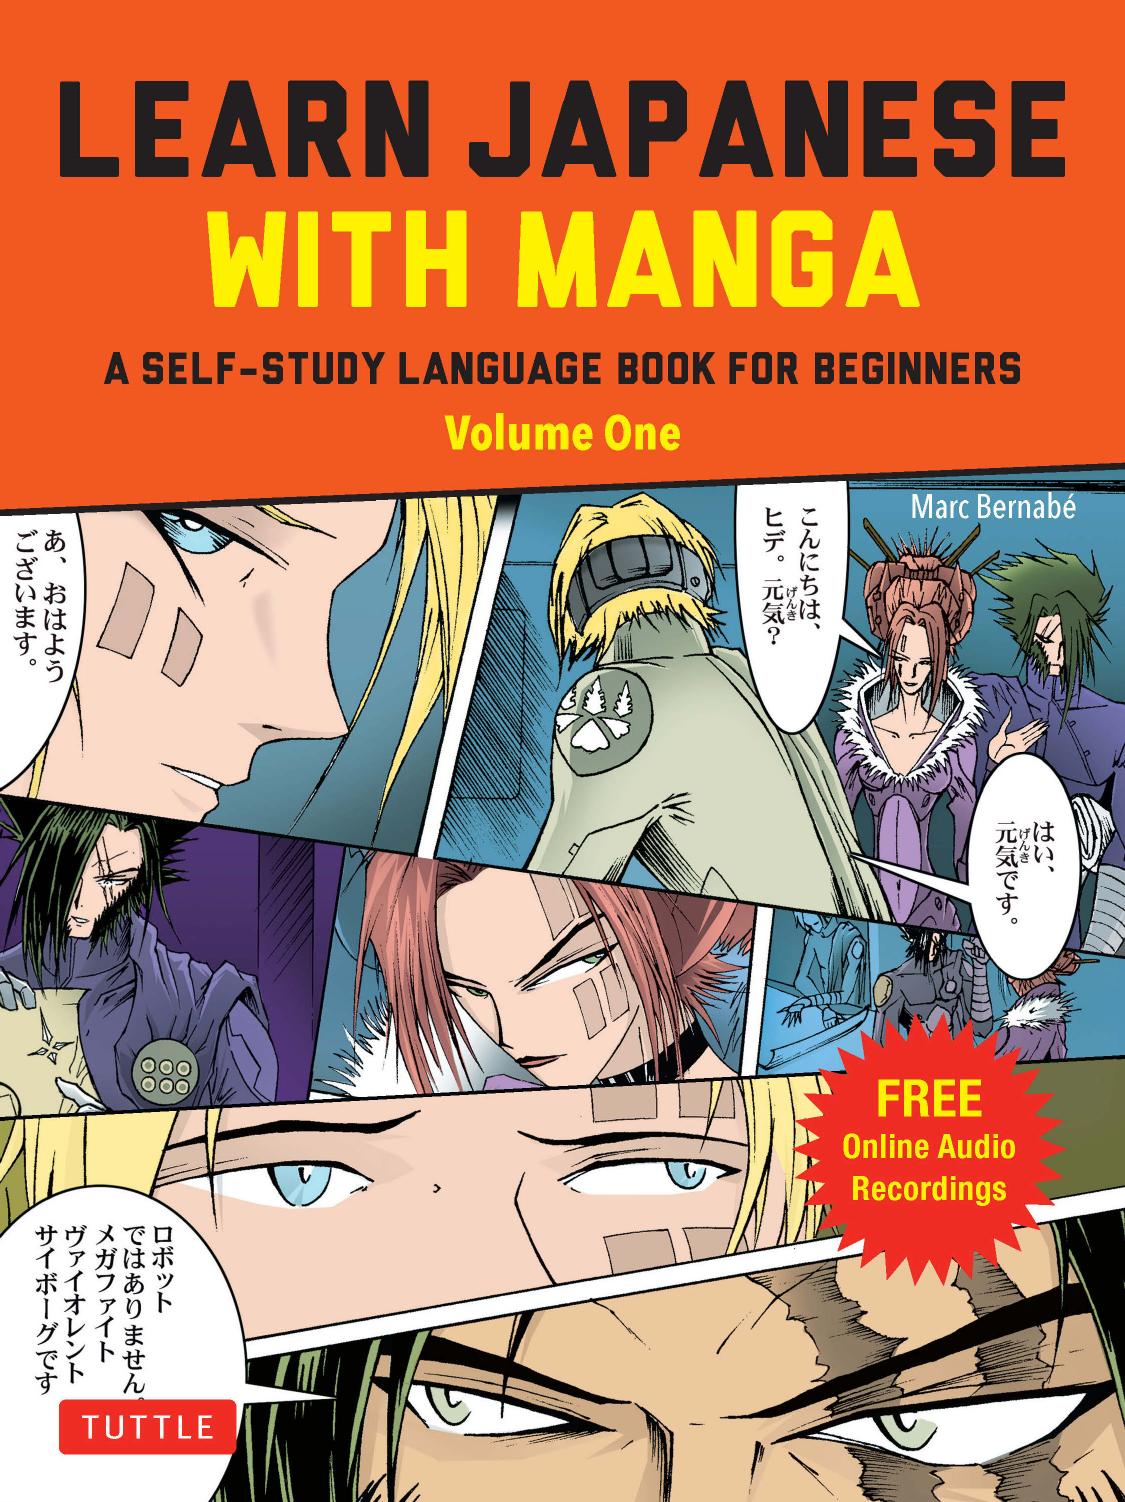 Learn Japanese with Manga Volume One by Marc Bernabé